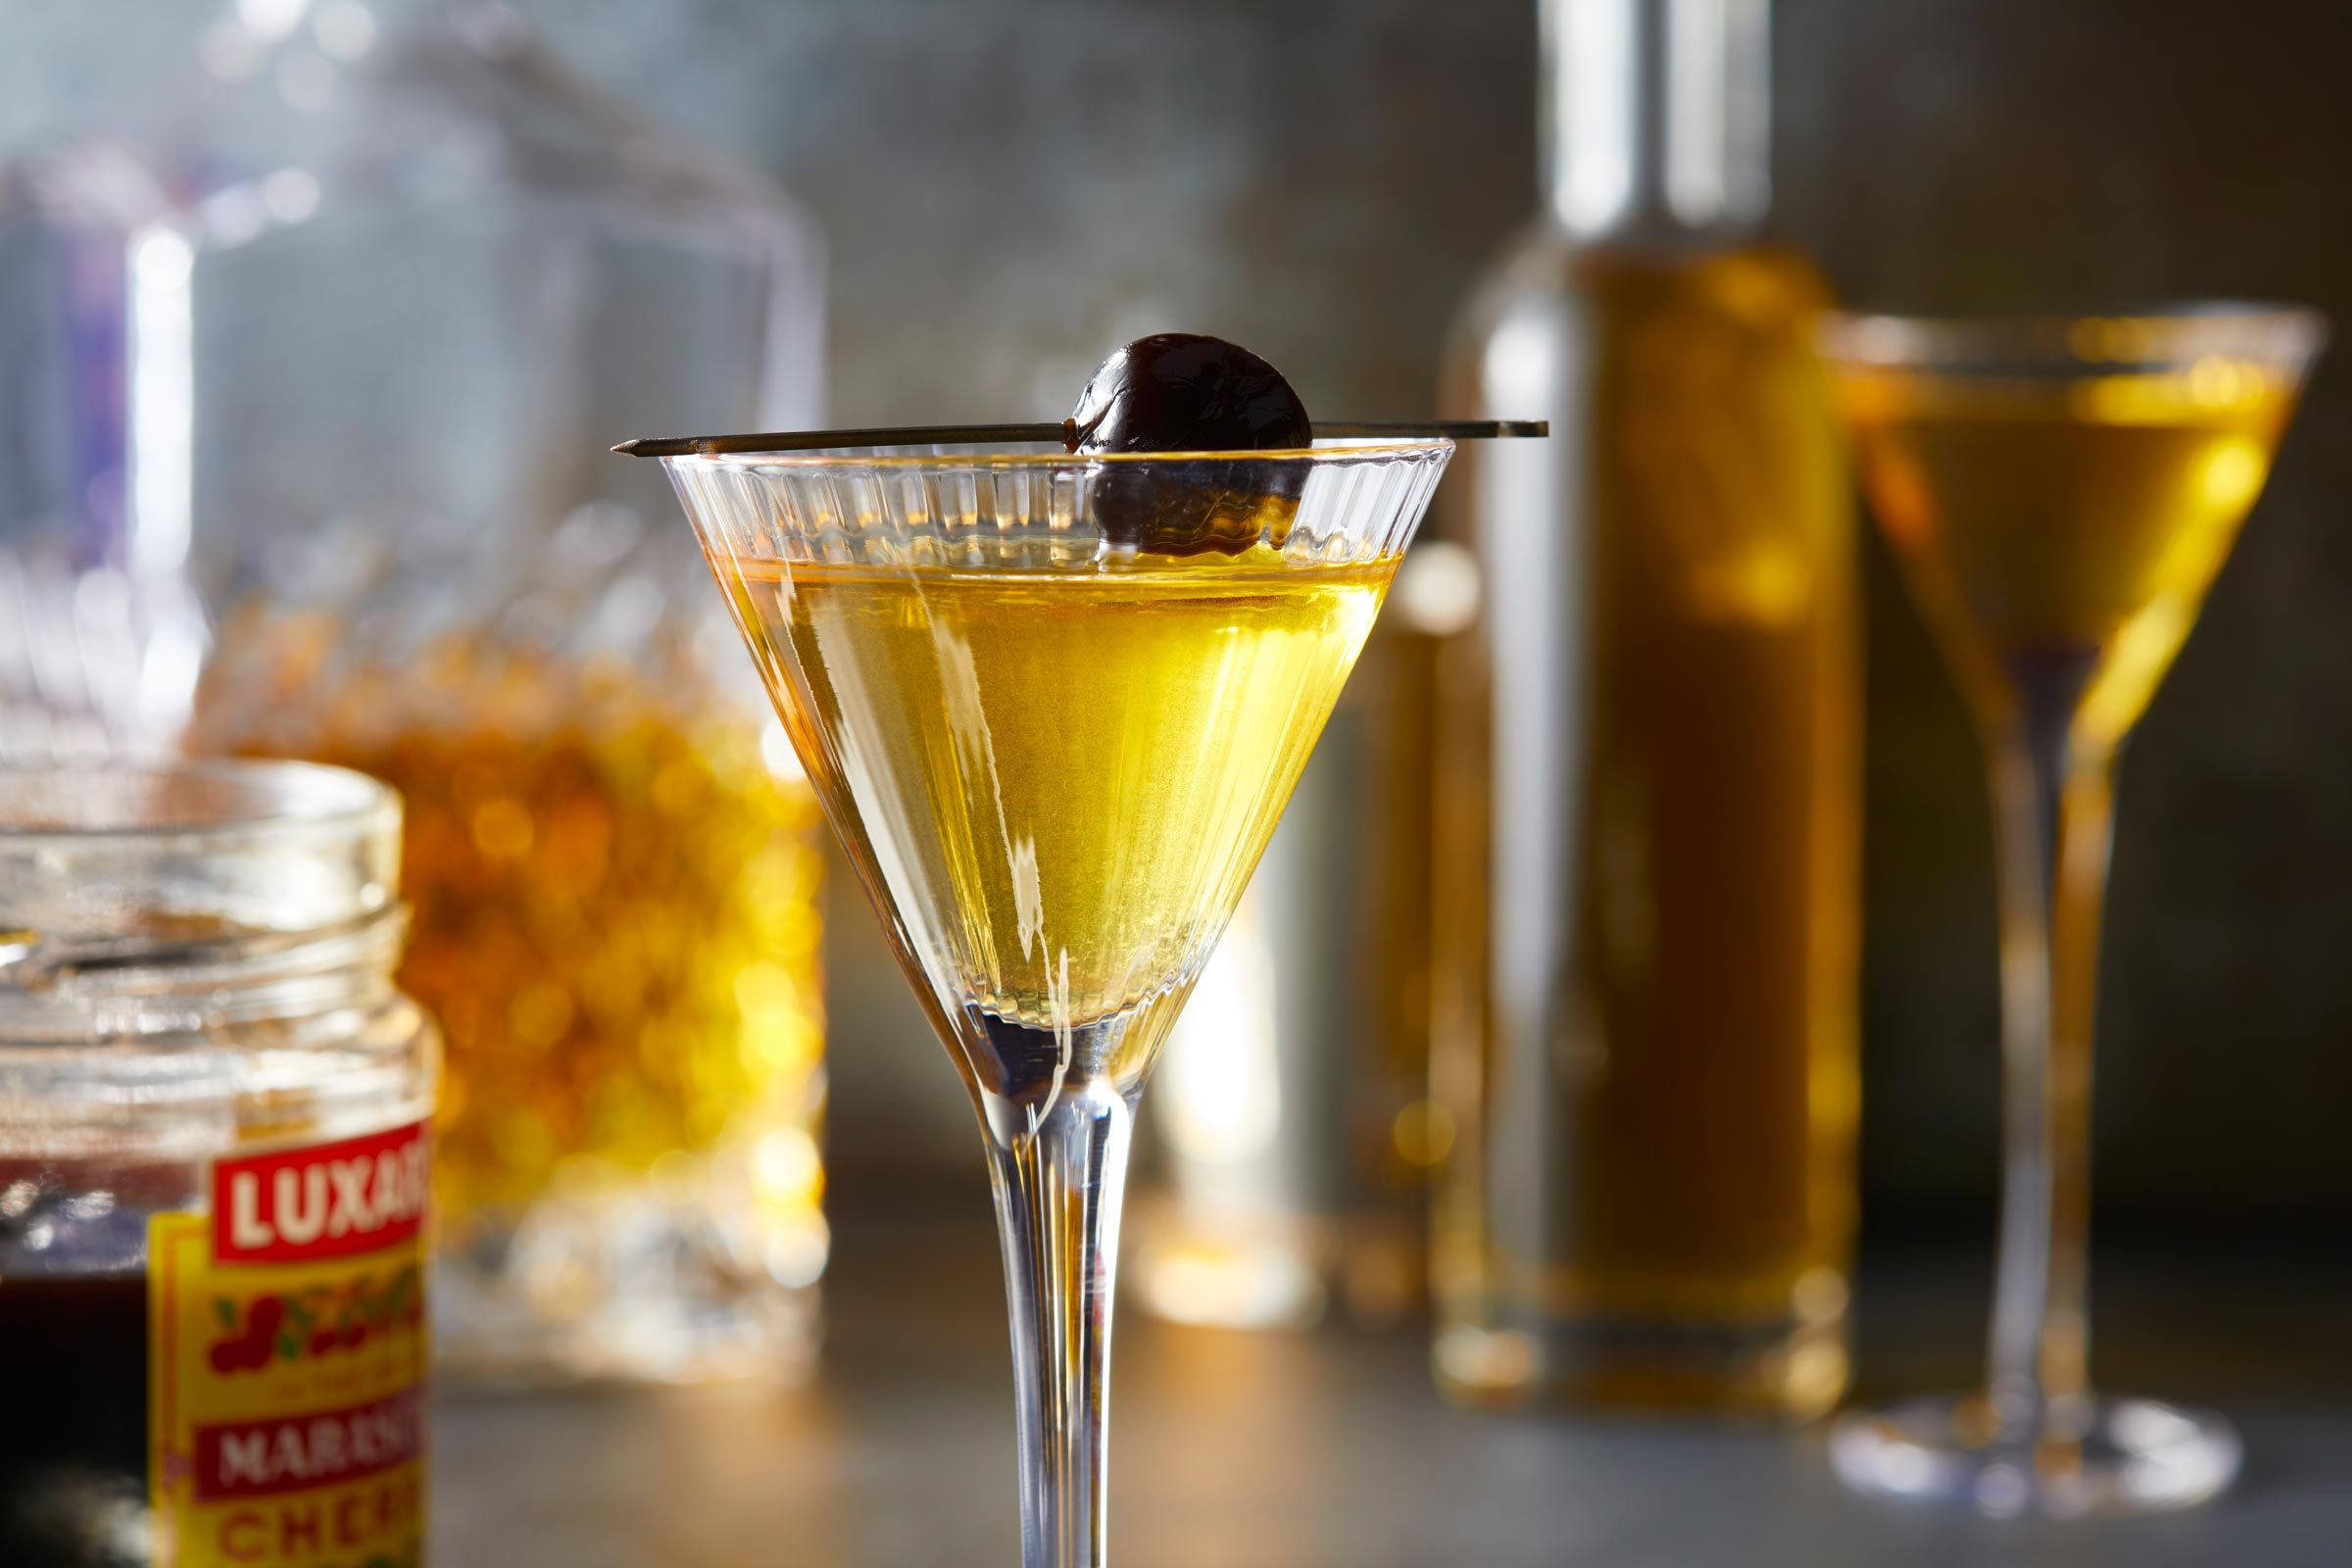 Grand Marnier Recipe: How to Make This Spirit Yourself